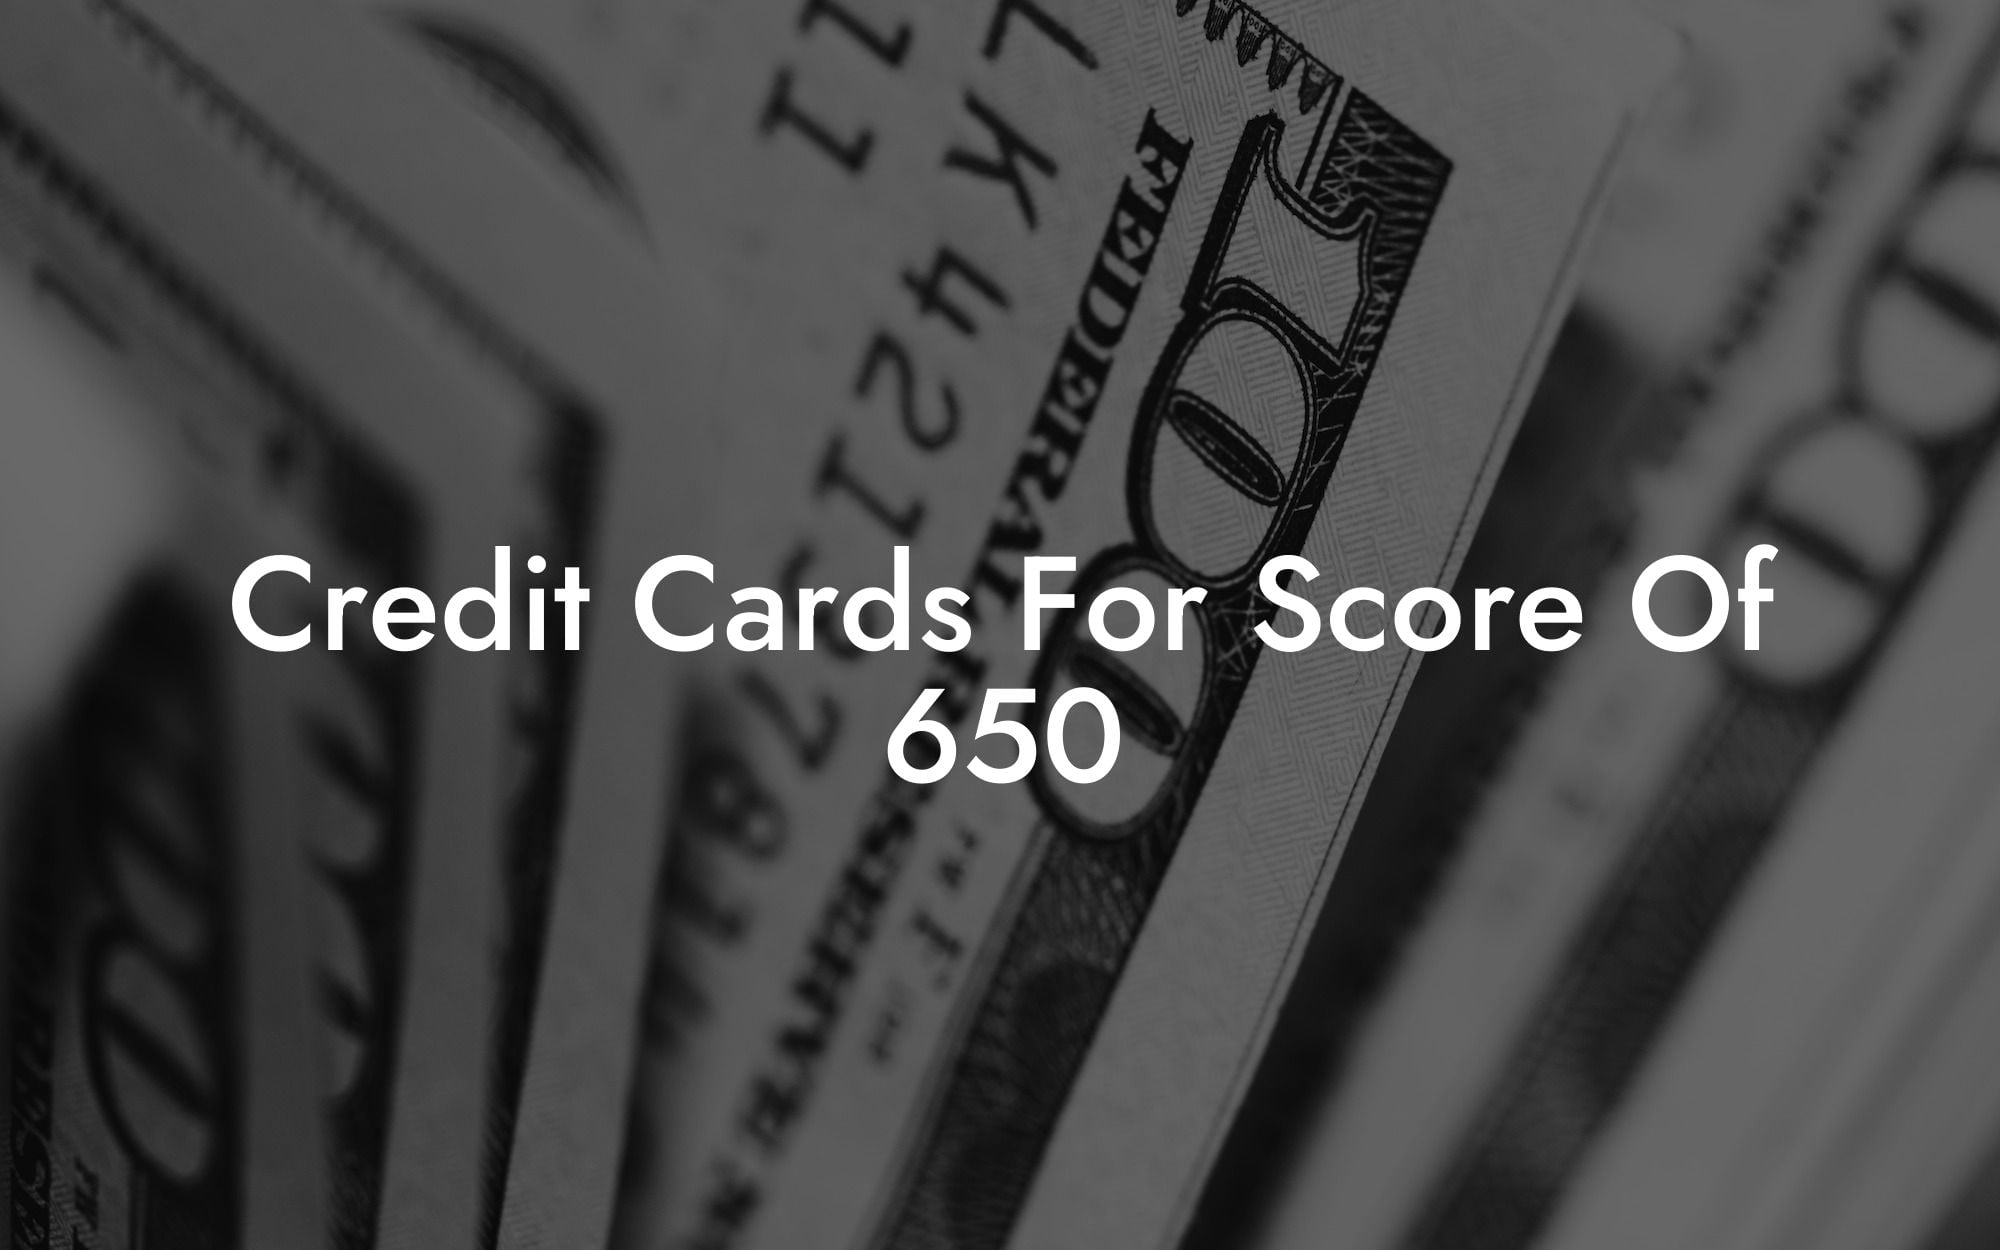 Credit Cards For Score Of 650